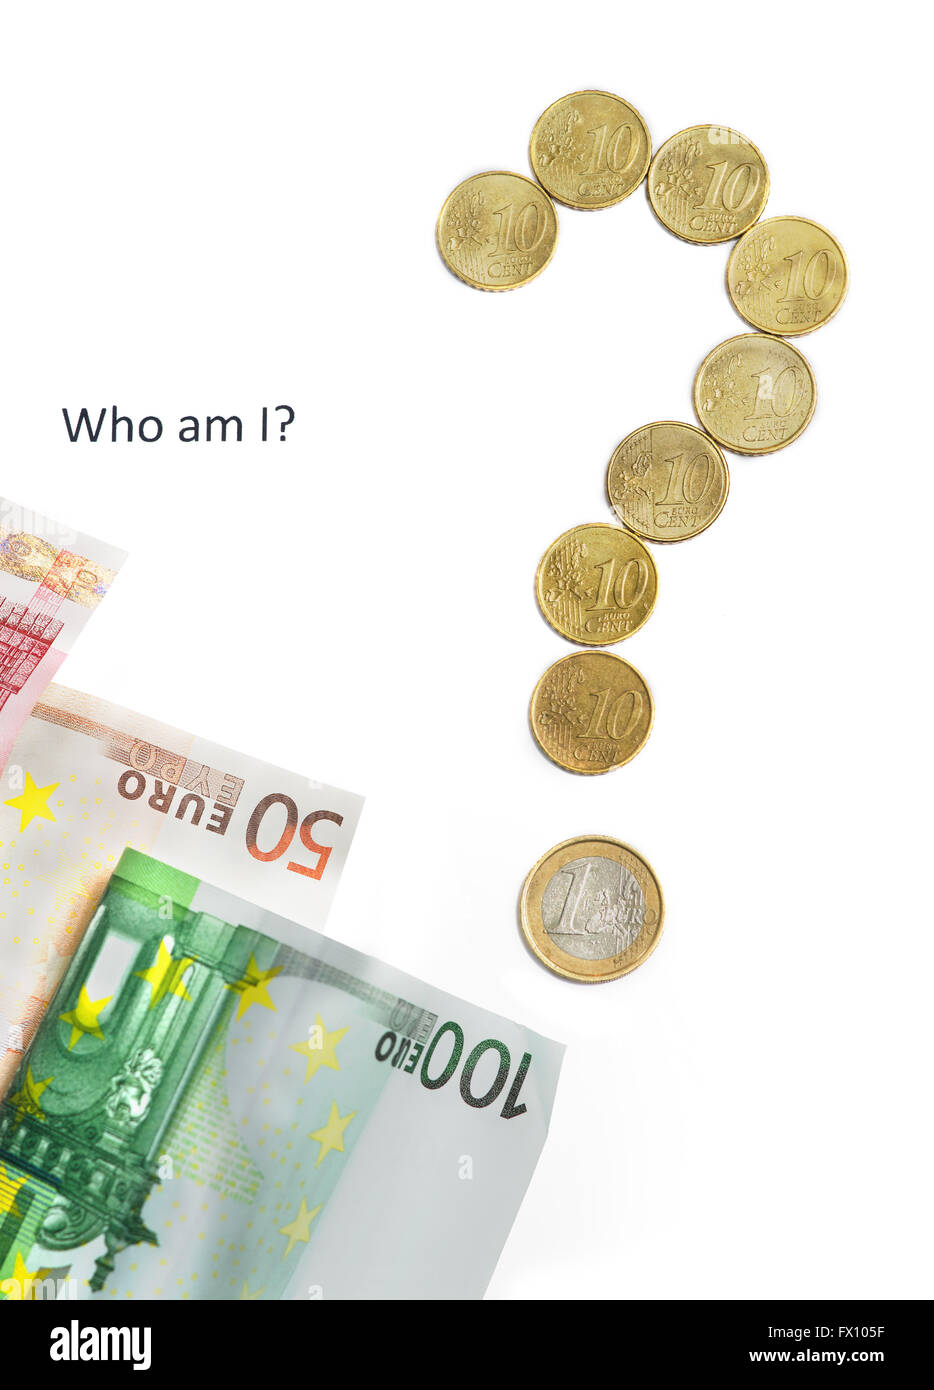 Who am I? Business concept with money isolated on white background. Stock Photo